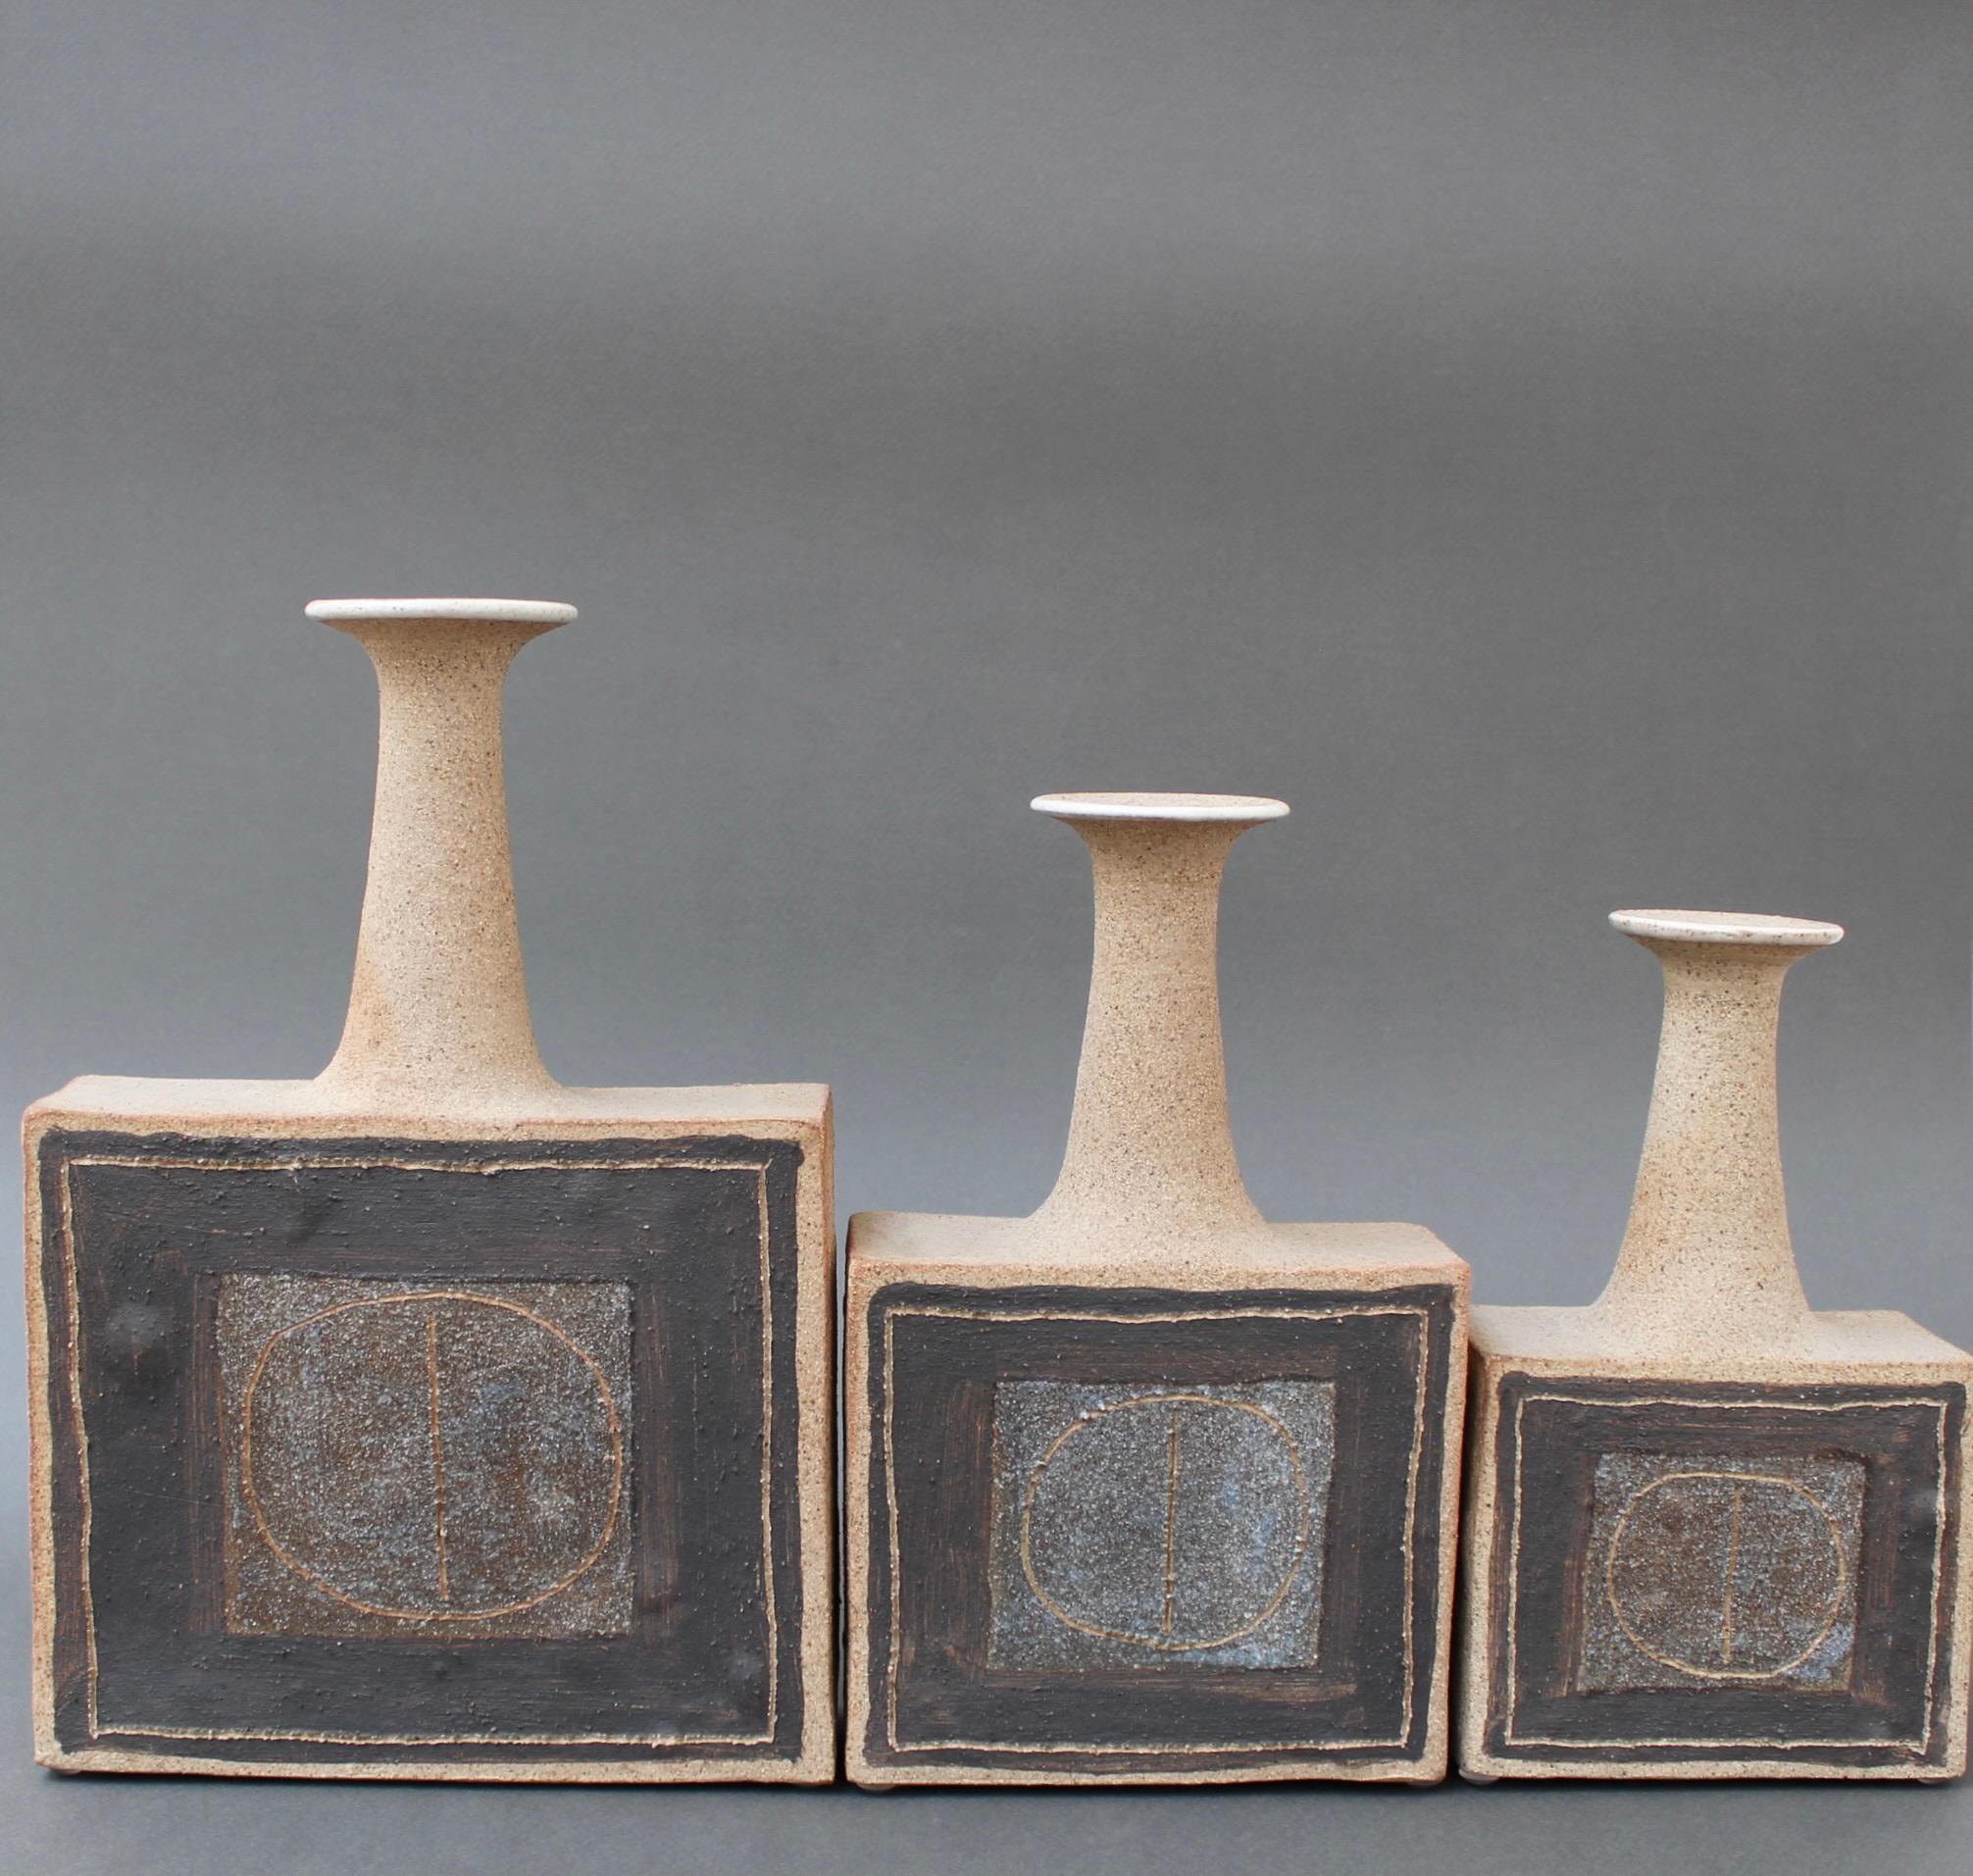 A trio of bottle-shaped vases by Italian ceramicist Bruno Gambone, (circa 1990s). These elegantly shaped narrow-opening flower vases are earthenware elevated to works of art. They are modern square bases with lean necks seemingly however, with